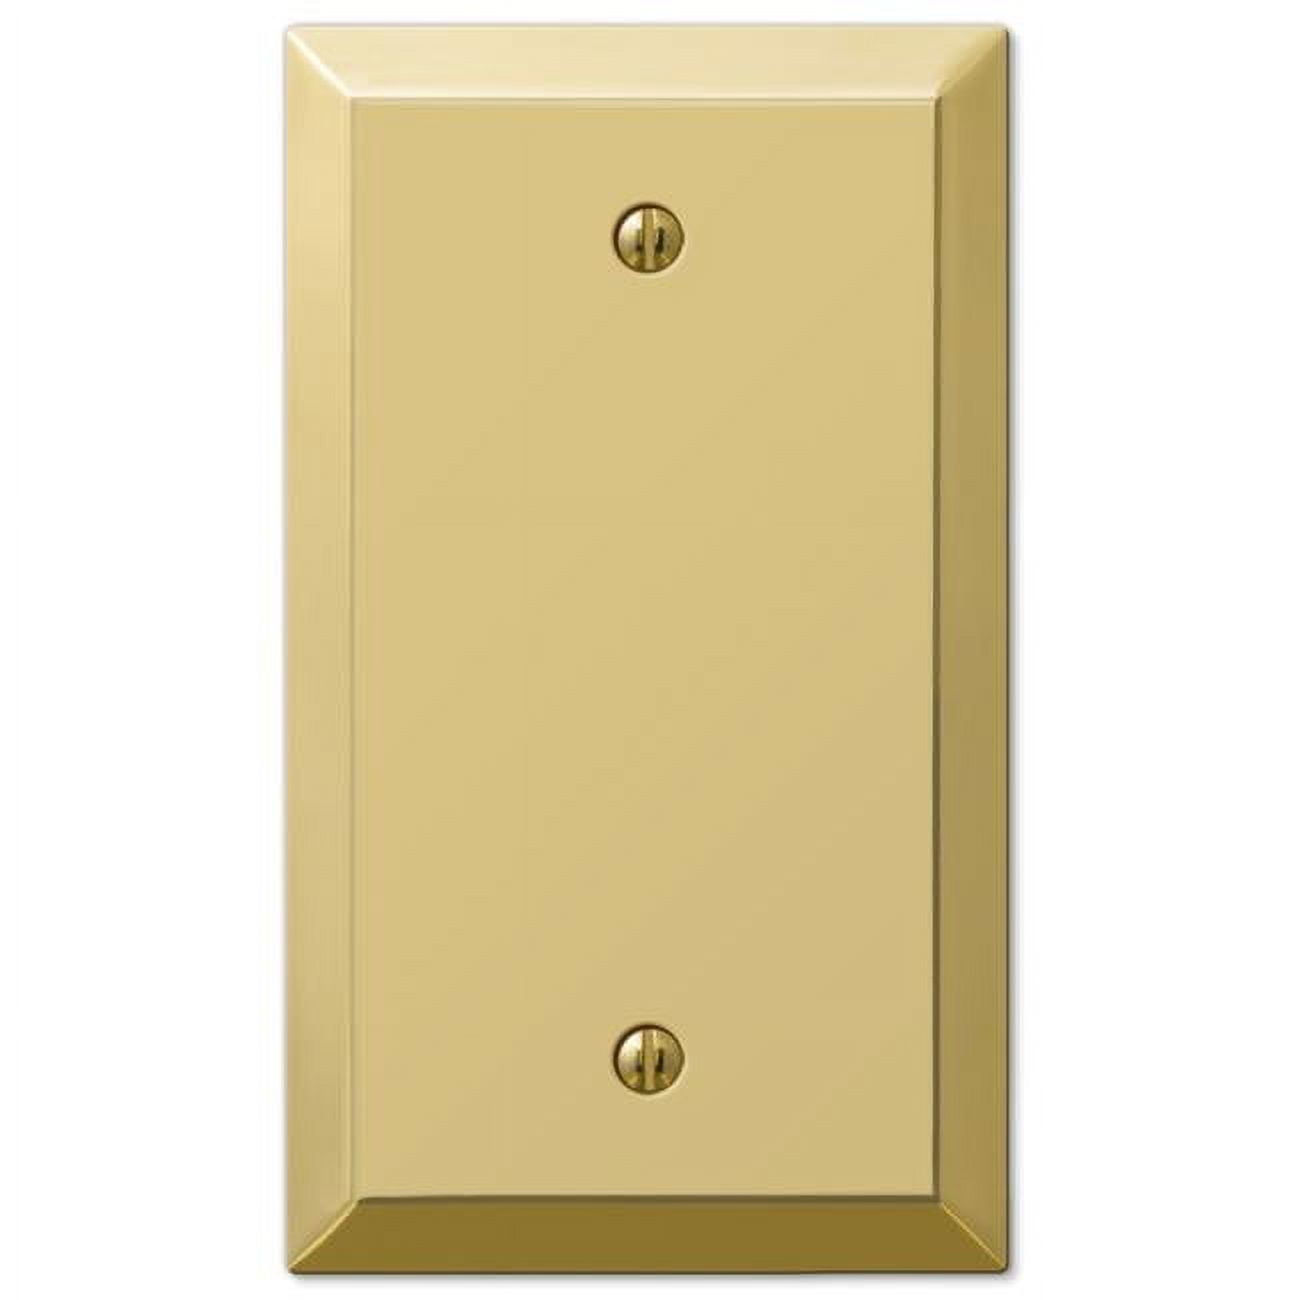 Picture of Amerelle 3009124 Century Polished Brass 1 Gang Stamped Steel Blank Wall Plate, Beige